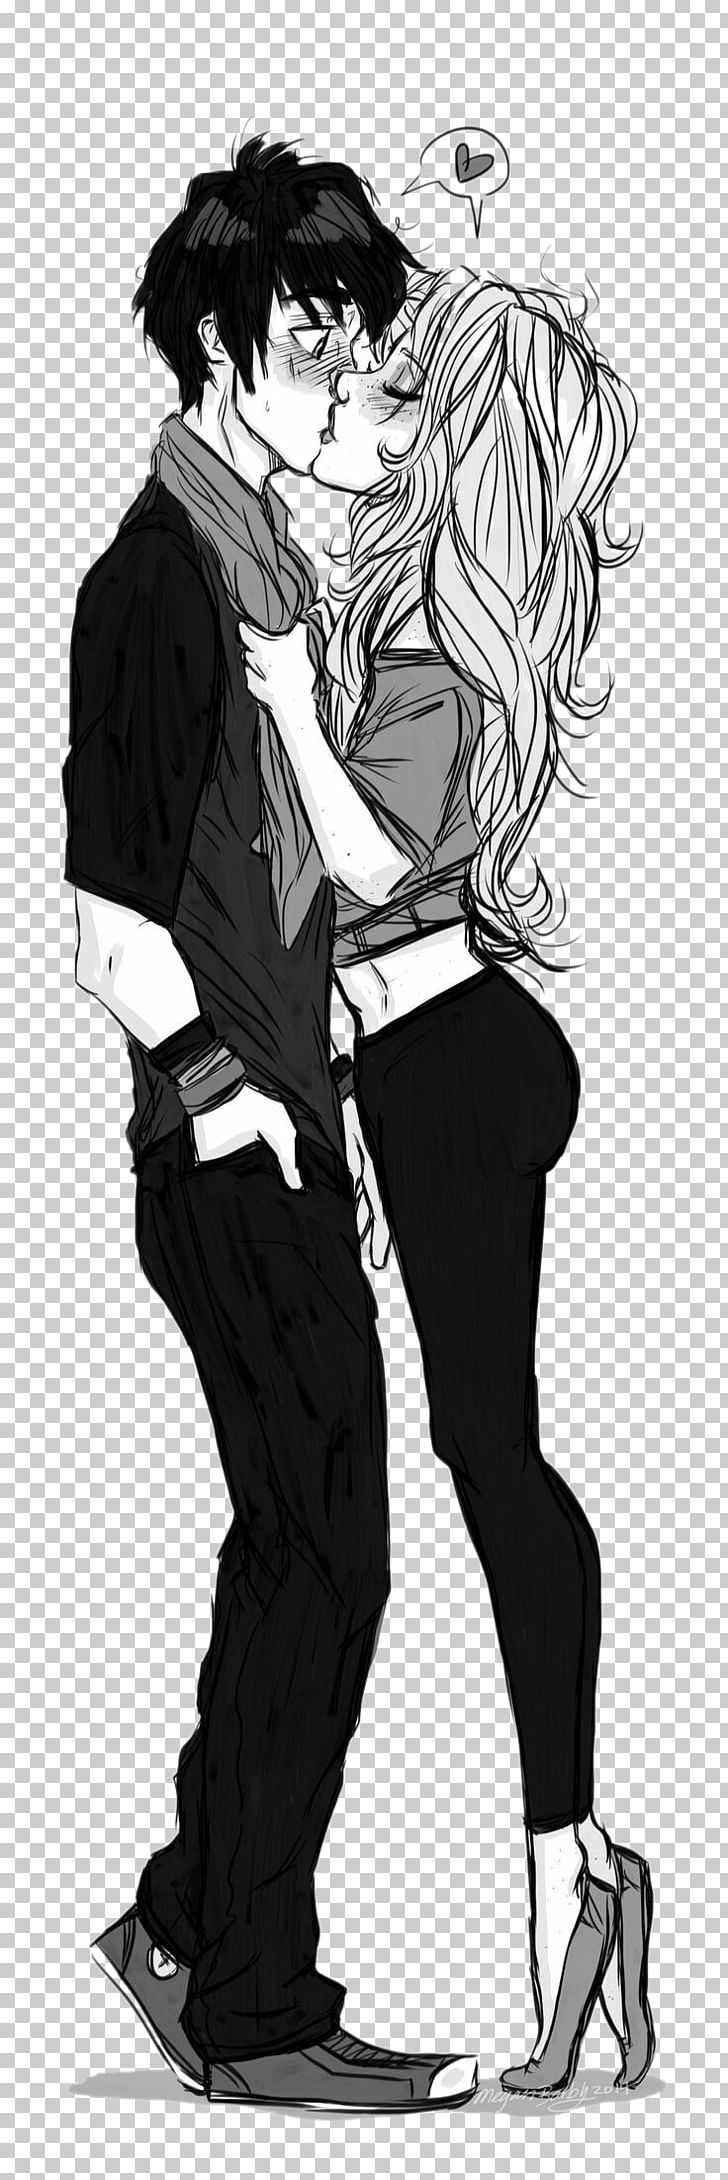 The Kiss Drawing Anime How to Draw Manga kiss love black Hair png   PNGEgg